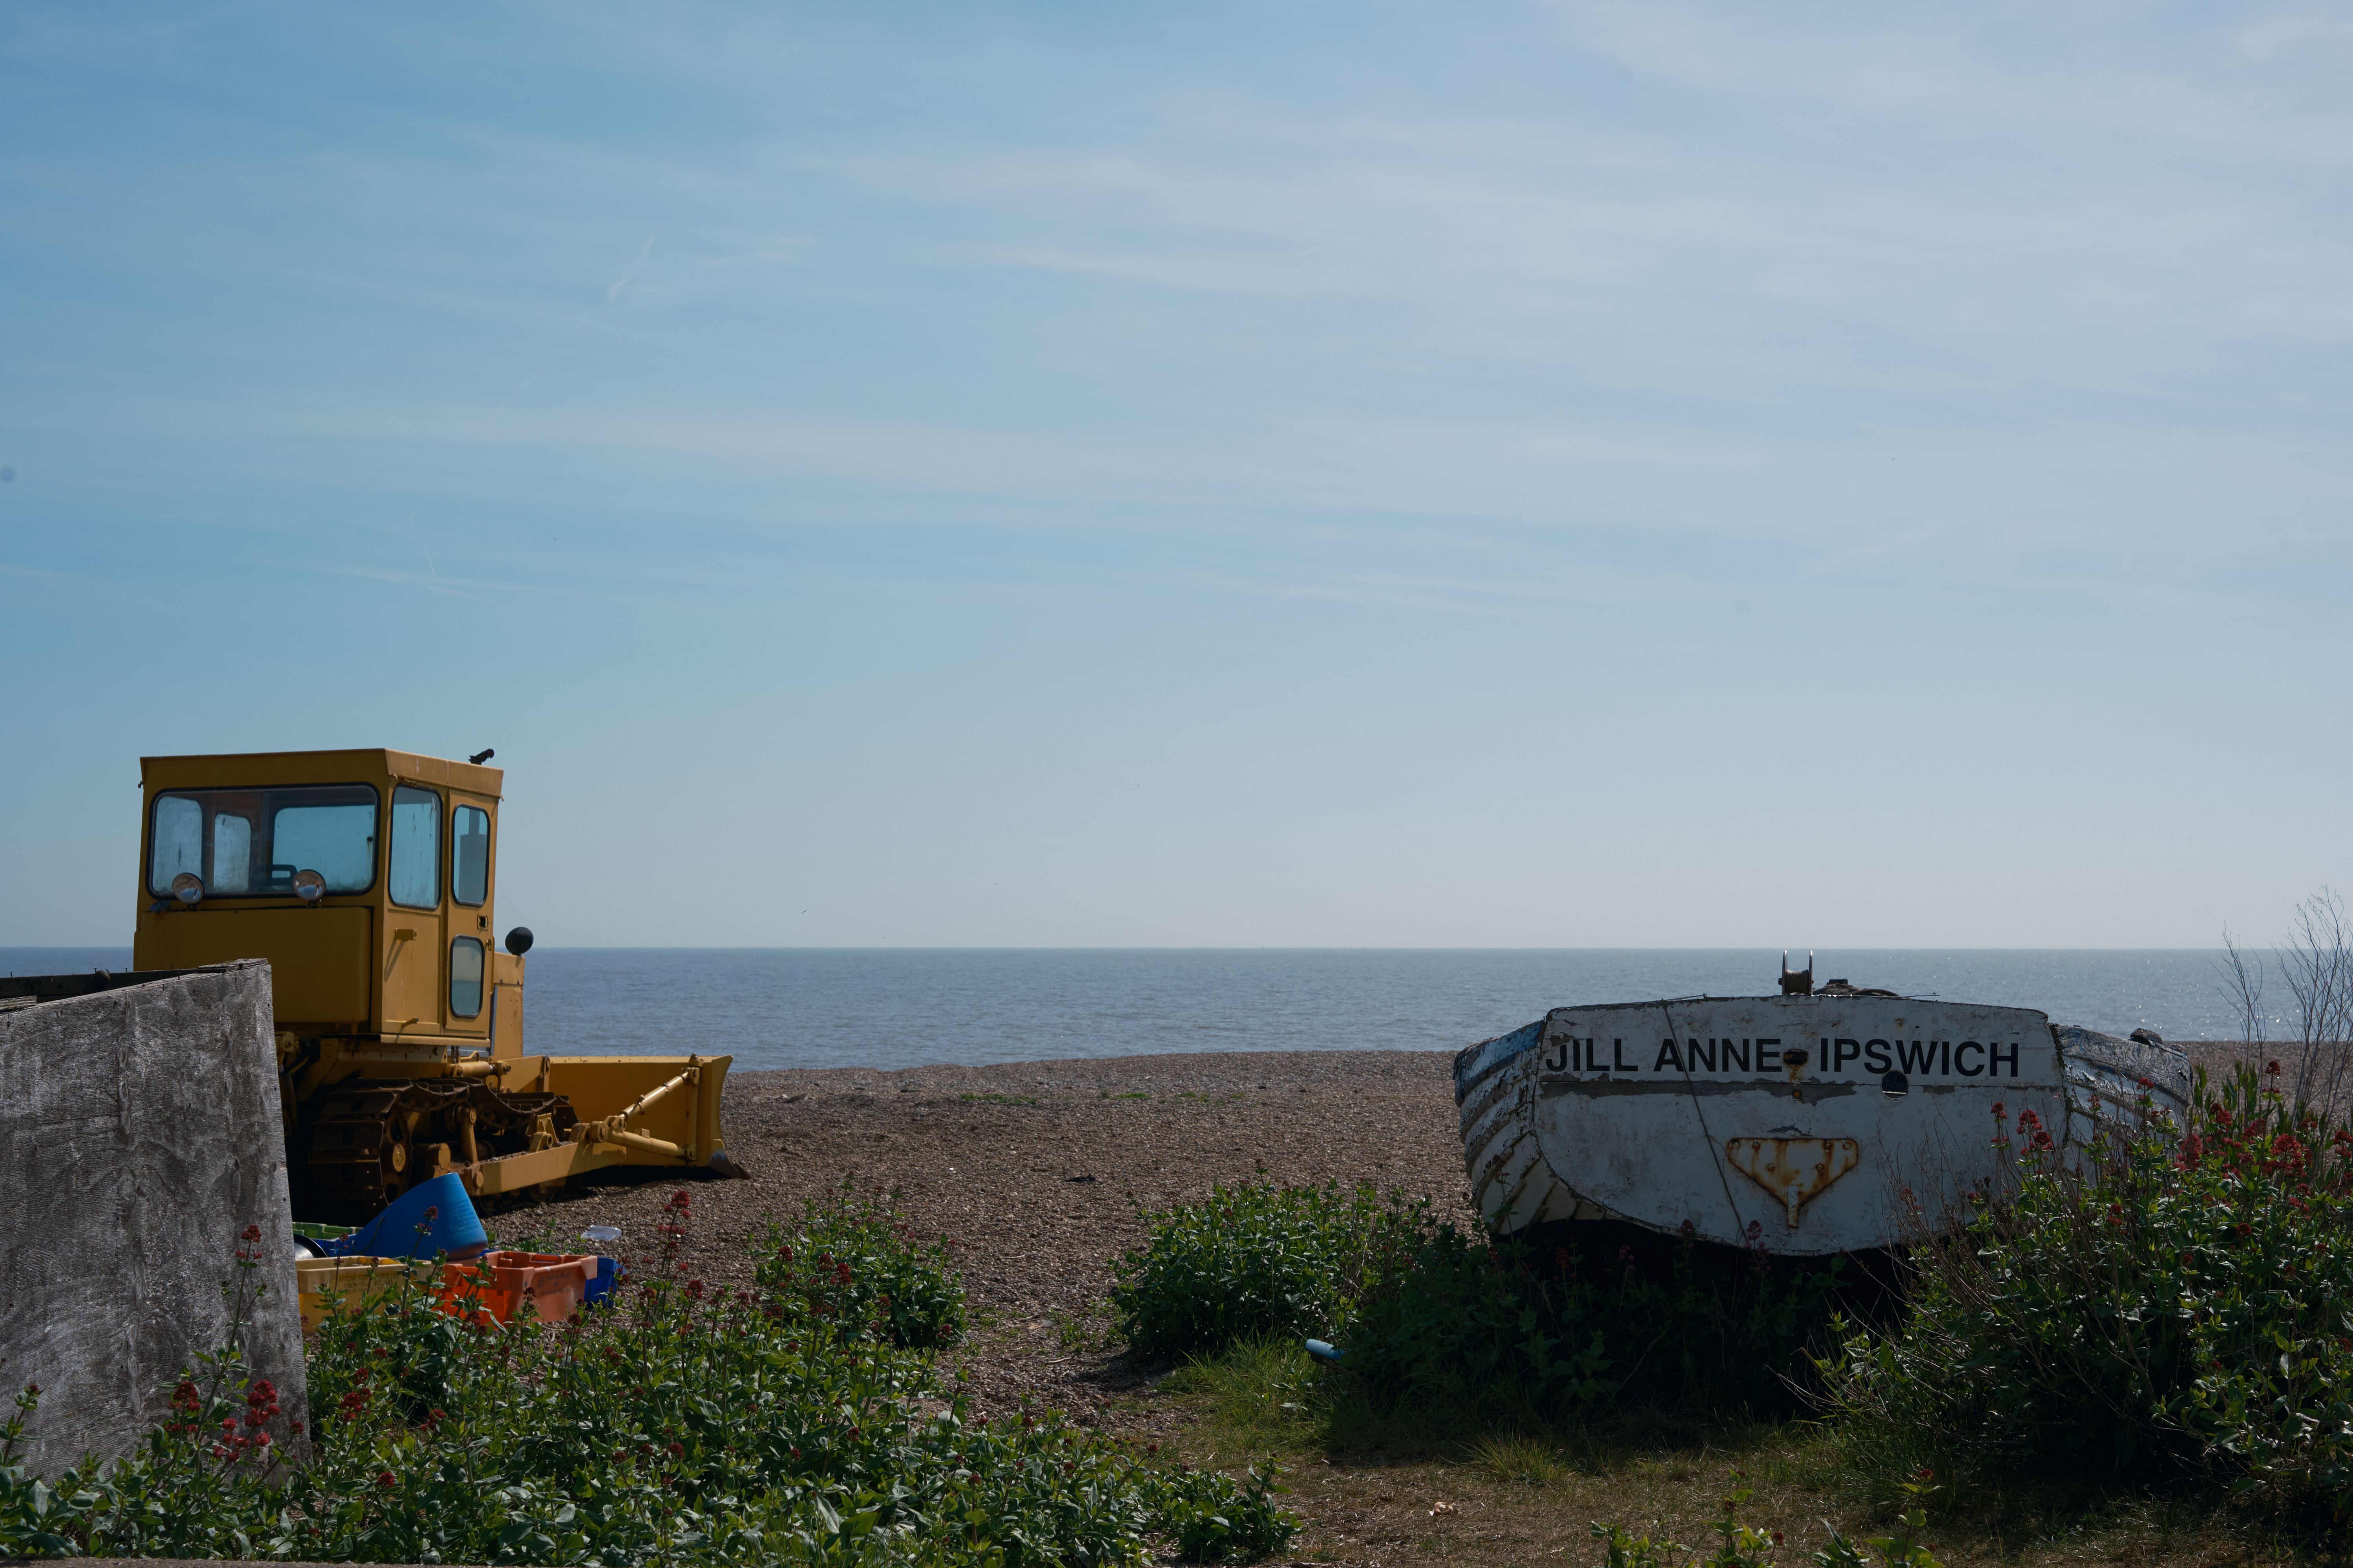 A digger and boat among the weed and pebbles